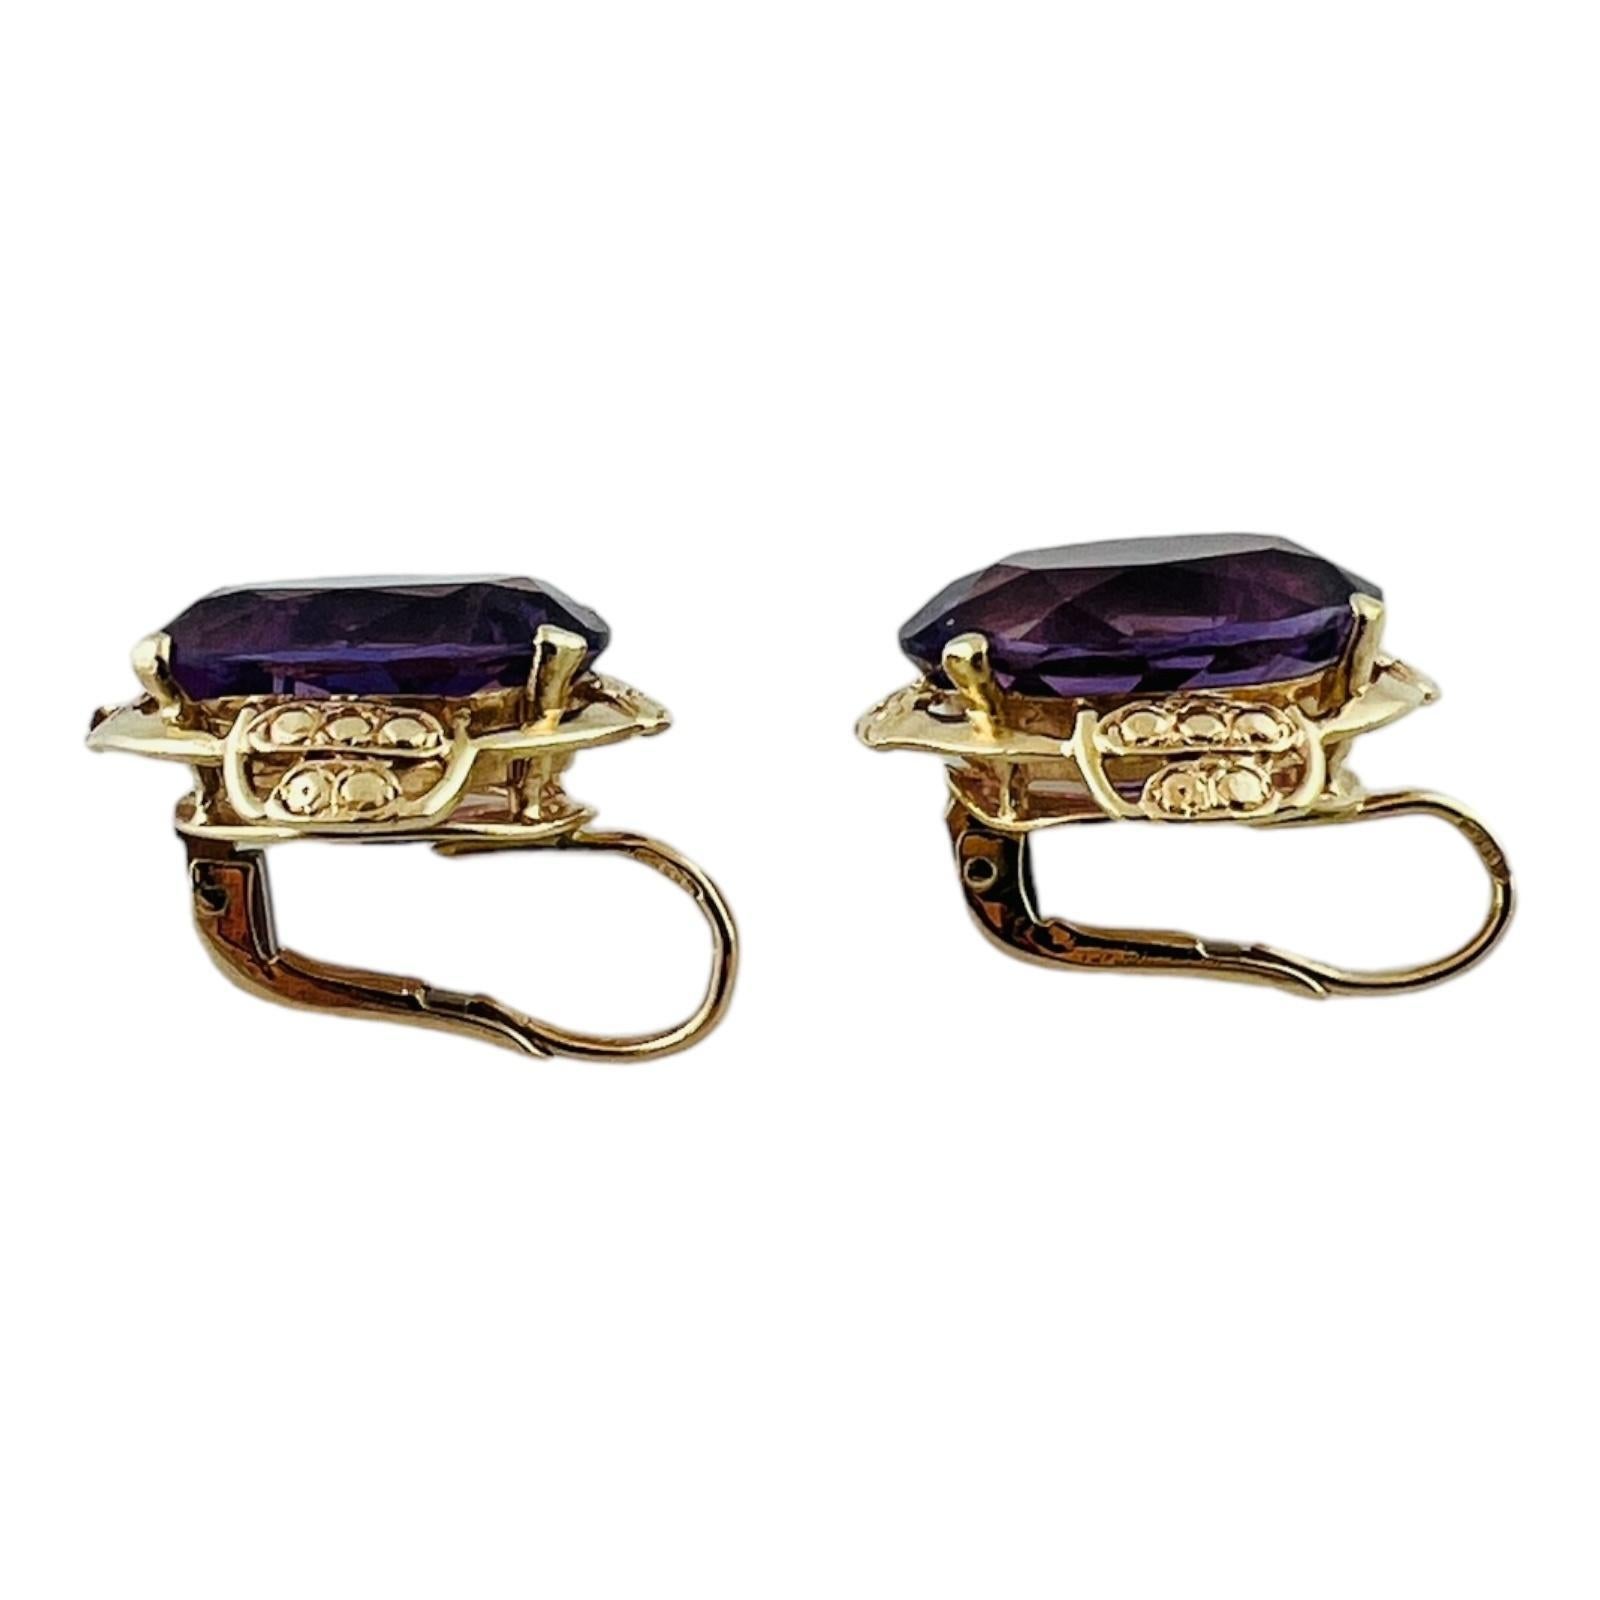 Vintage 14K Yellow Gold Oval Natural Amethyst Ornate Earrings

These gorgeous ornate leverback earrings feature 2 stunning oval shaped cut amethyst stones!

Amethyst size: 15.96mm X 11.82mm X 7.68mm

Amethyst weight: 16.18 cttw

Size: 19.46mm X